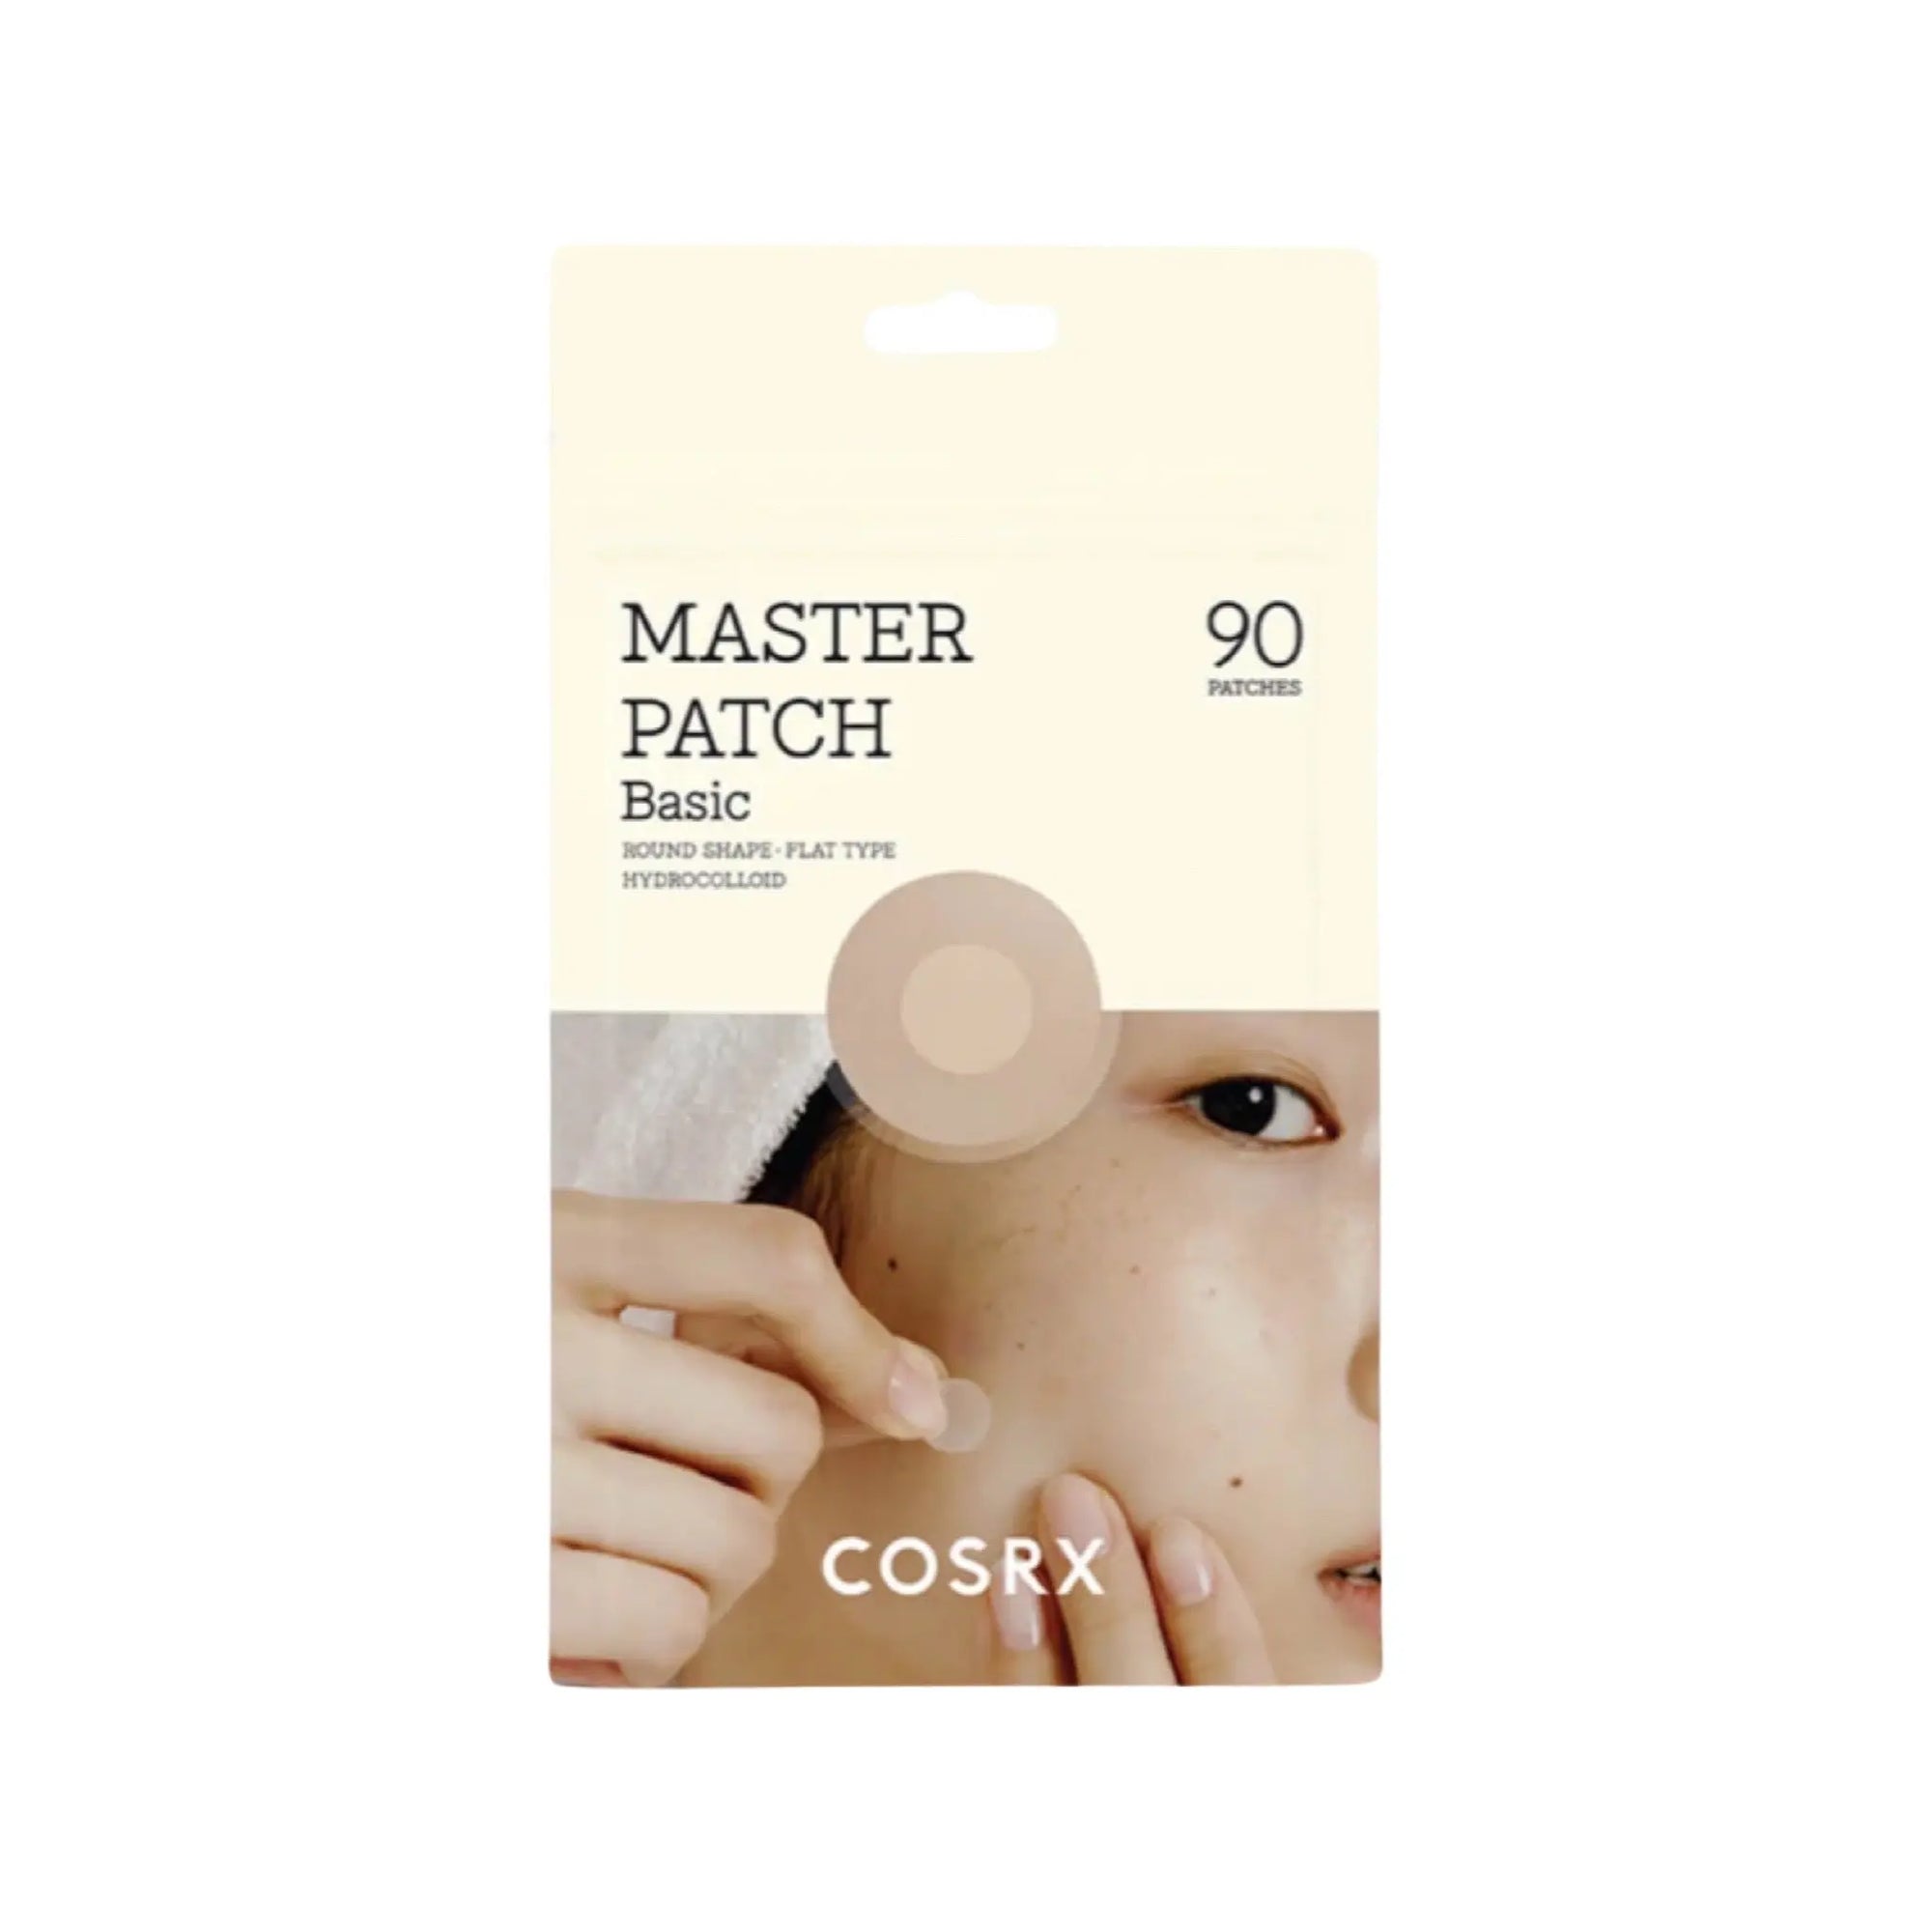 COSRX - Master Patch Basic (90 patches) WanderShop